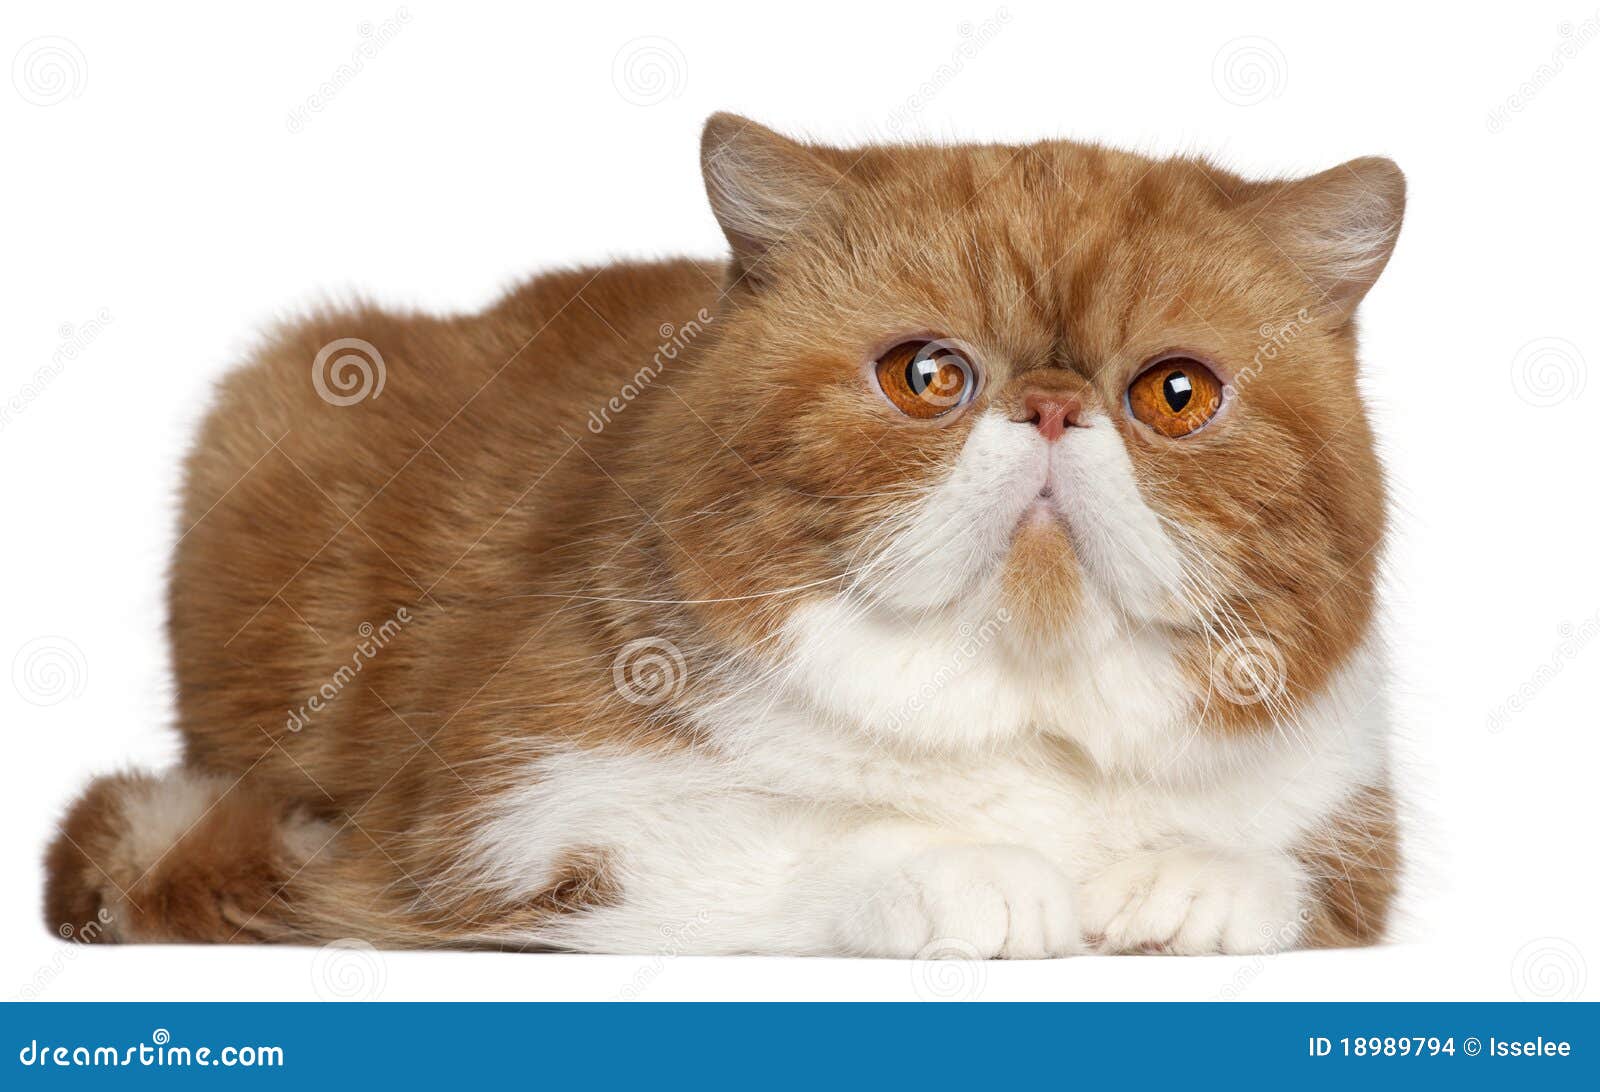 exotic shorthair cat, 2 and a half years old